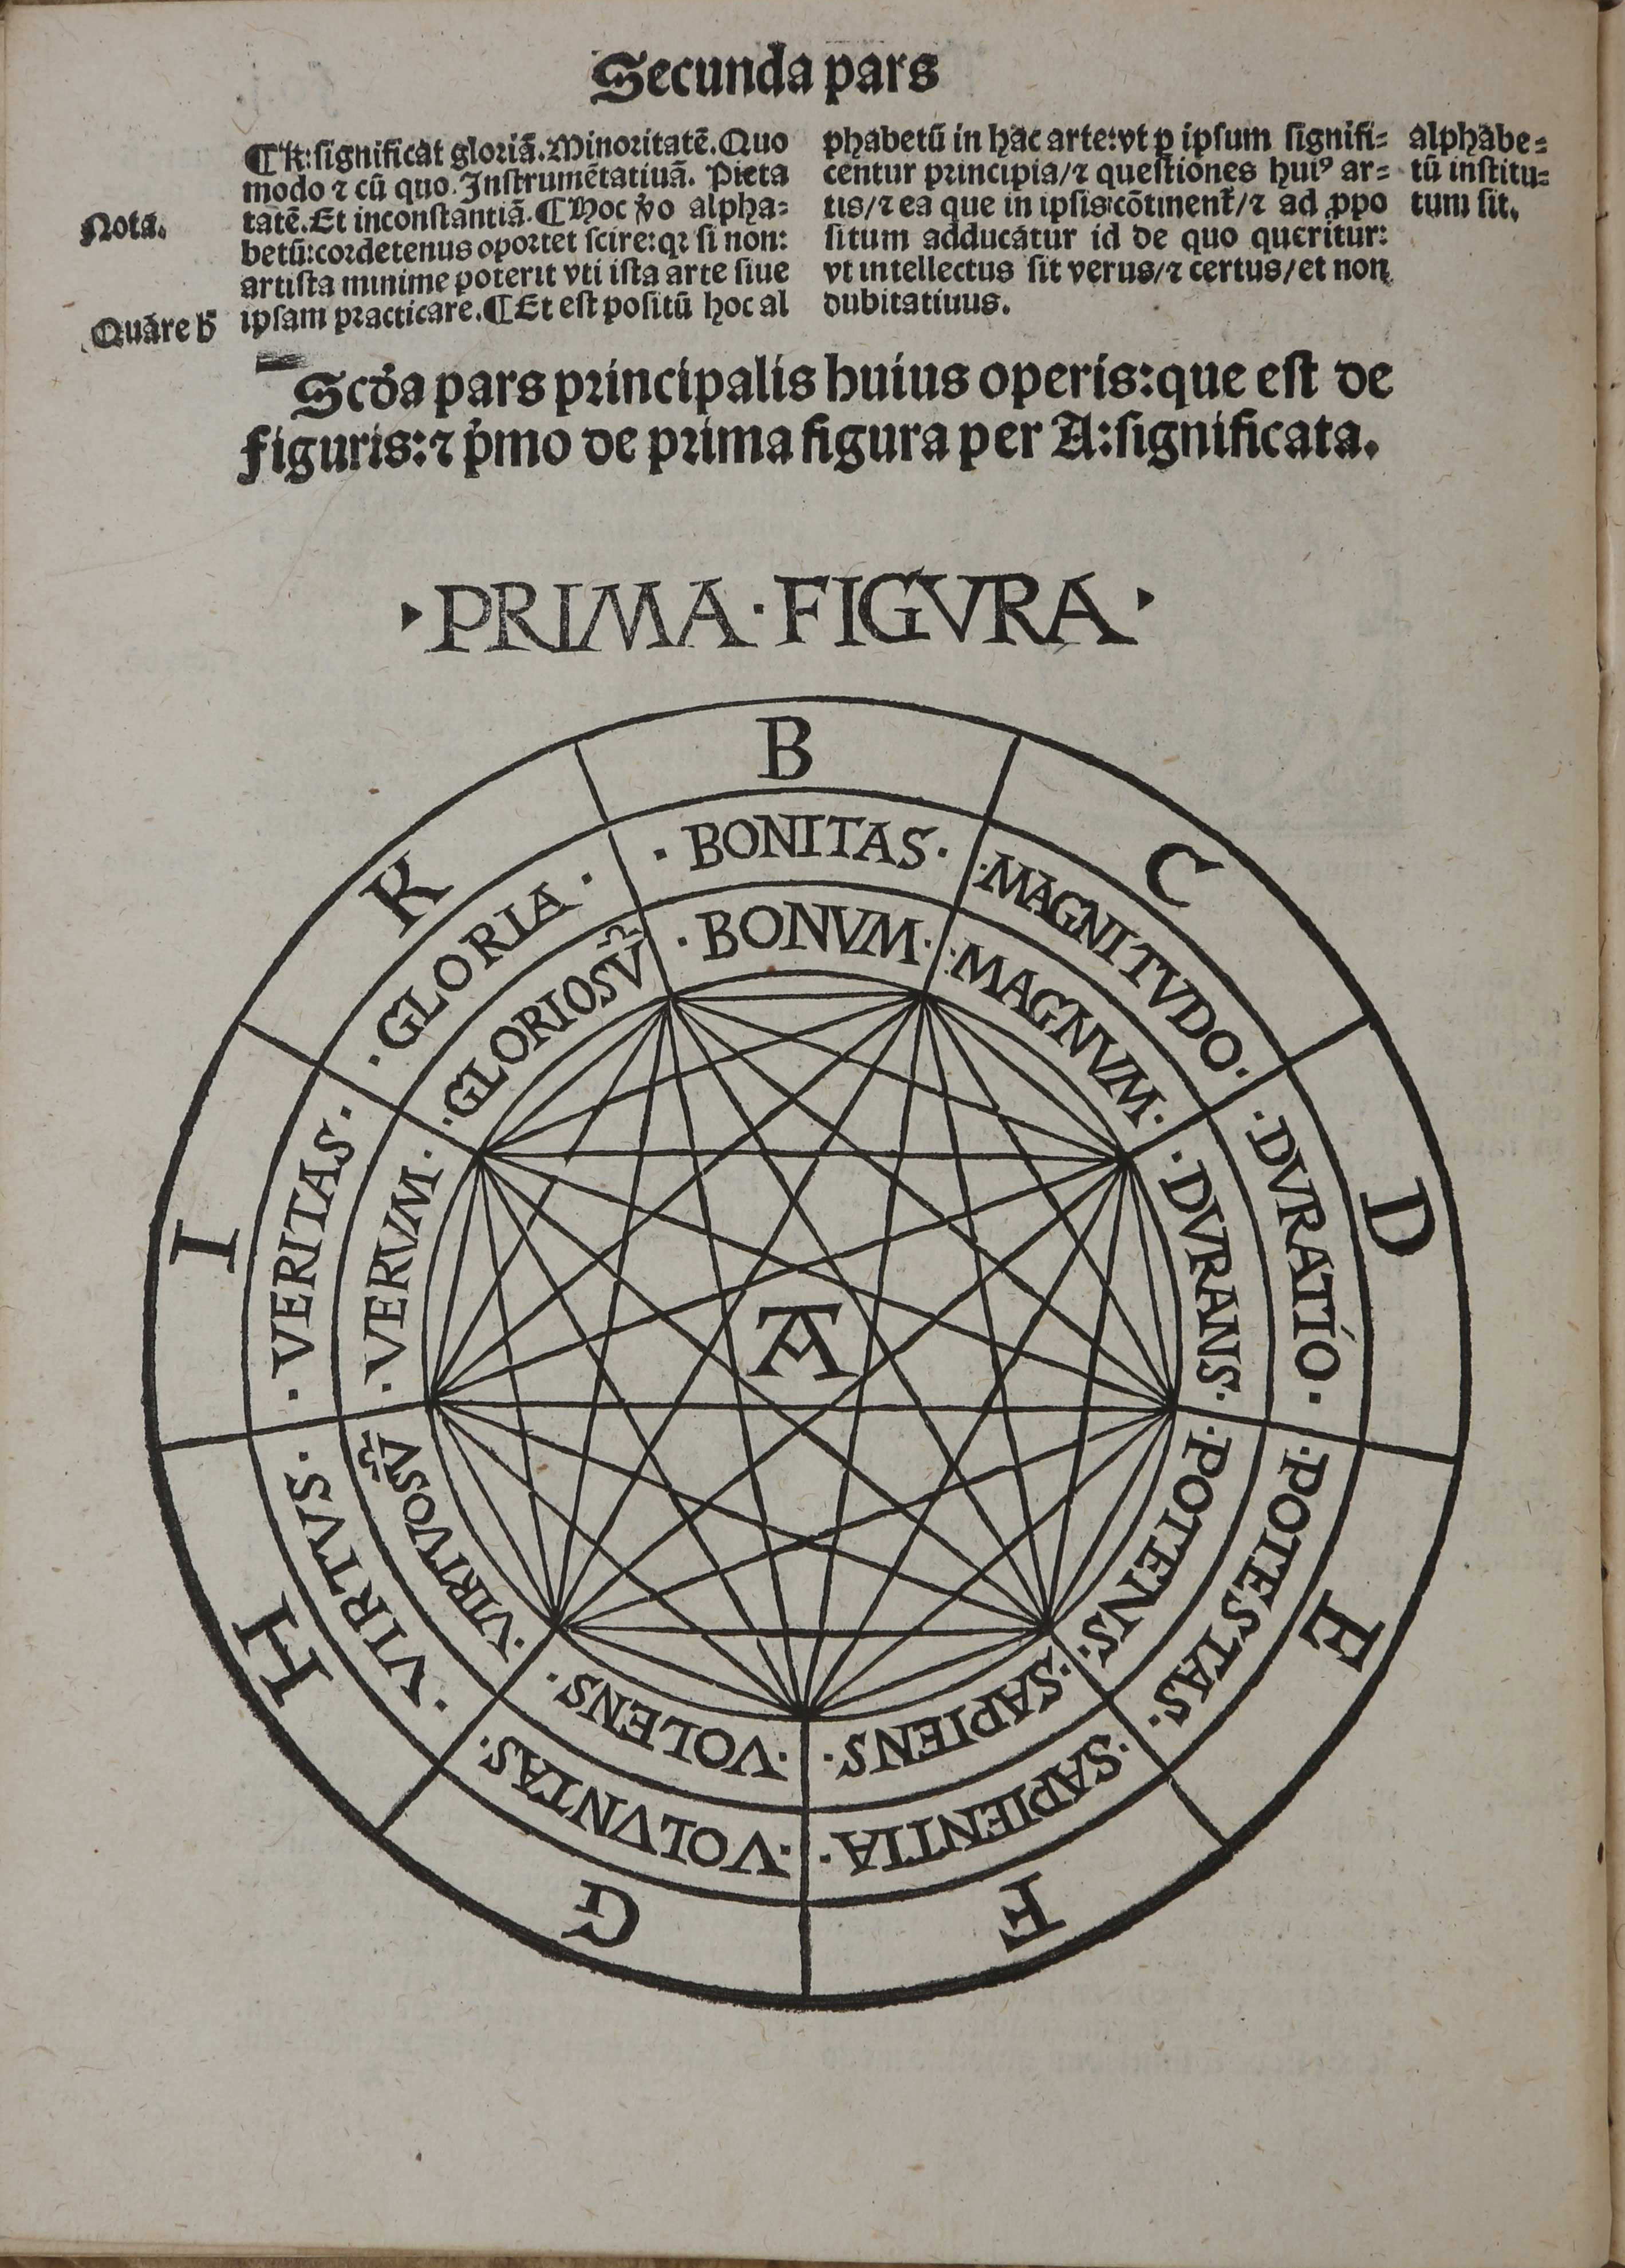 A page from Ars Magna featuring a circular diagram.